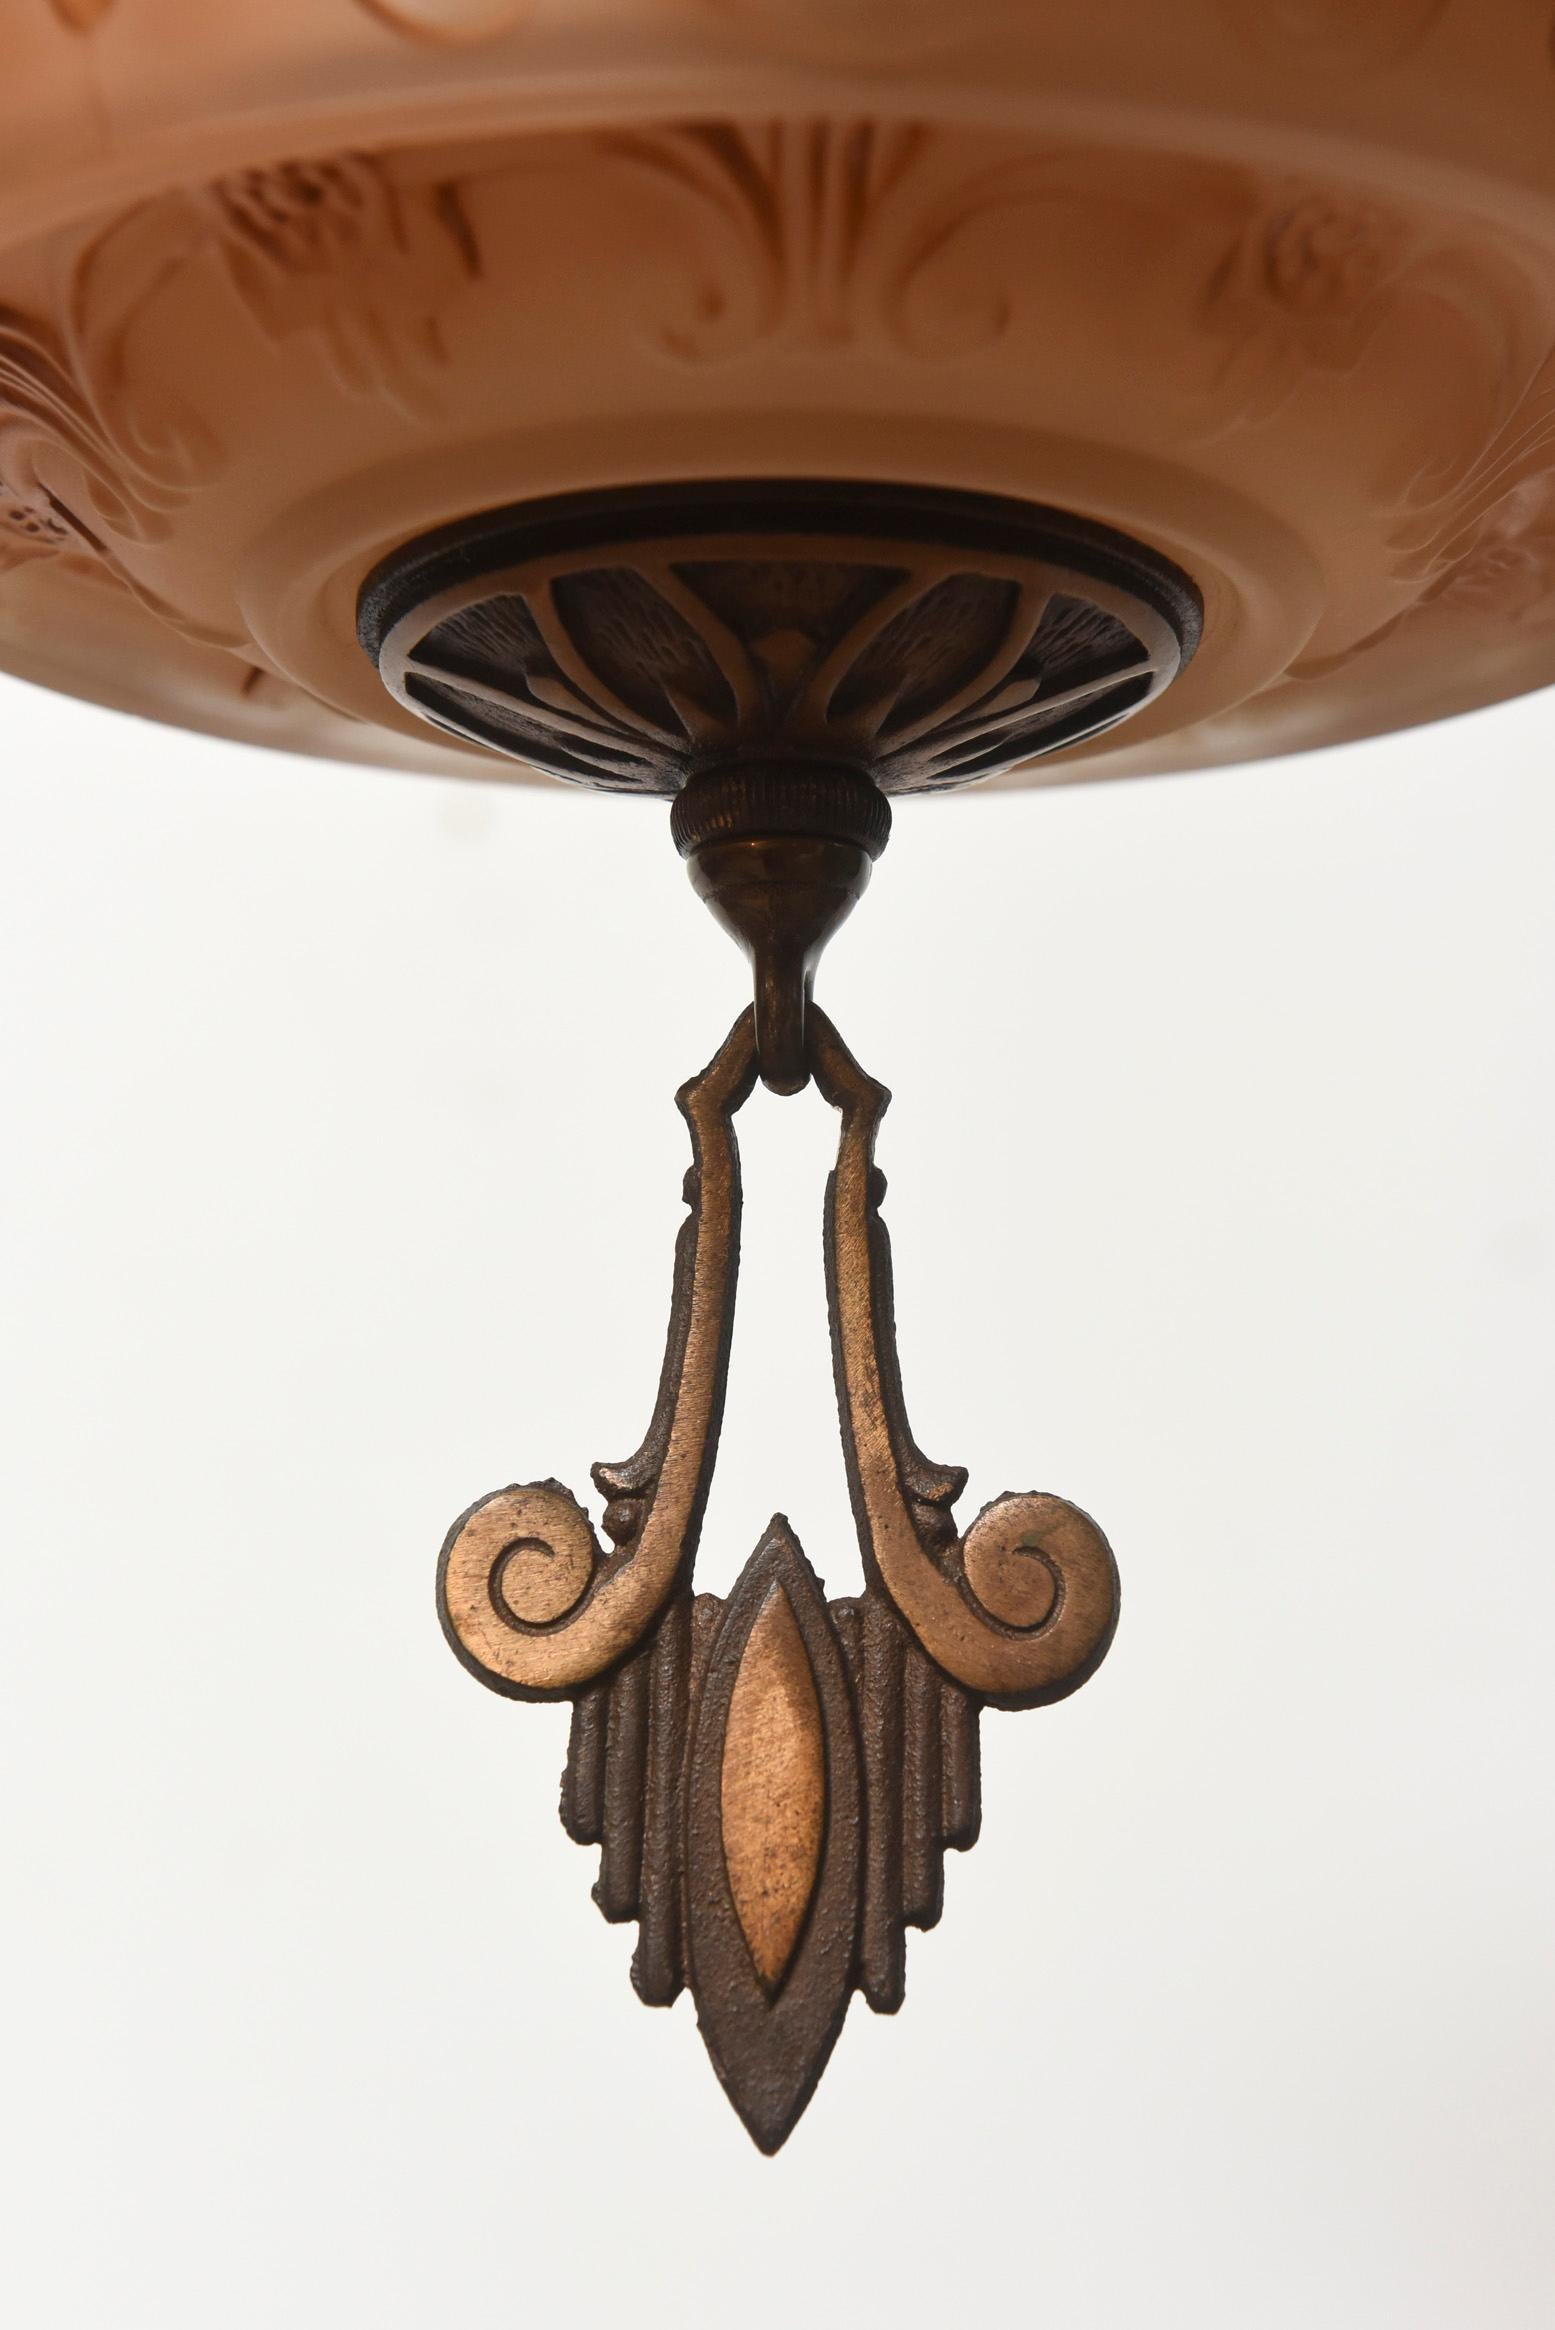 20th Century American Art Deco Bronze and Glass Chandelier by Markel